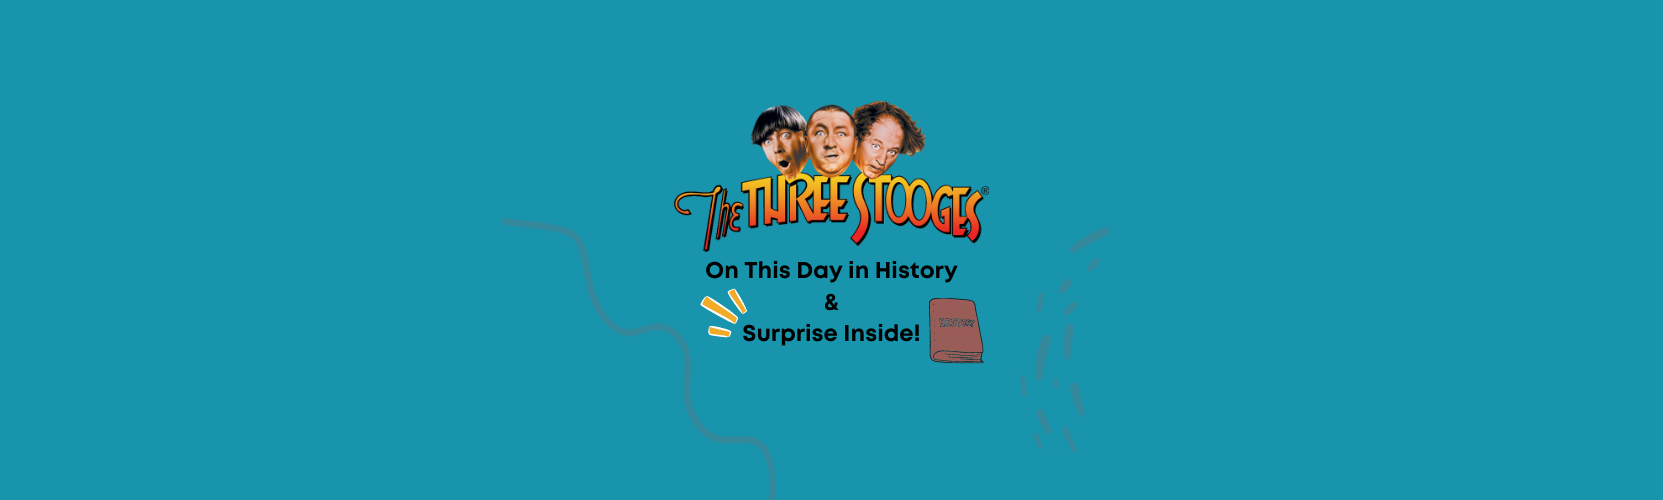 ShopKnuckleheads- On This Day in History & Surprise Inside!